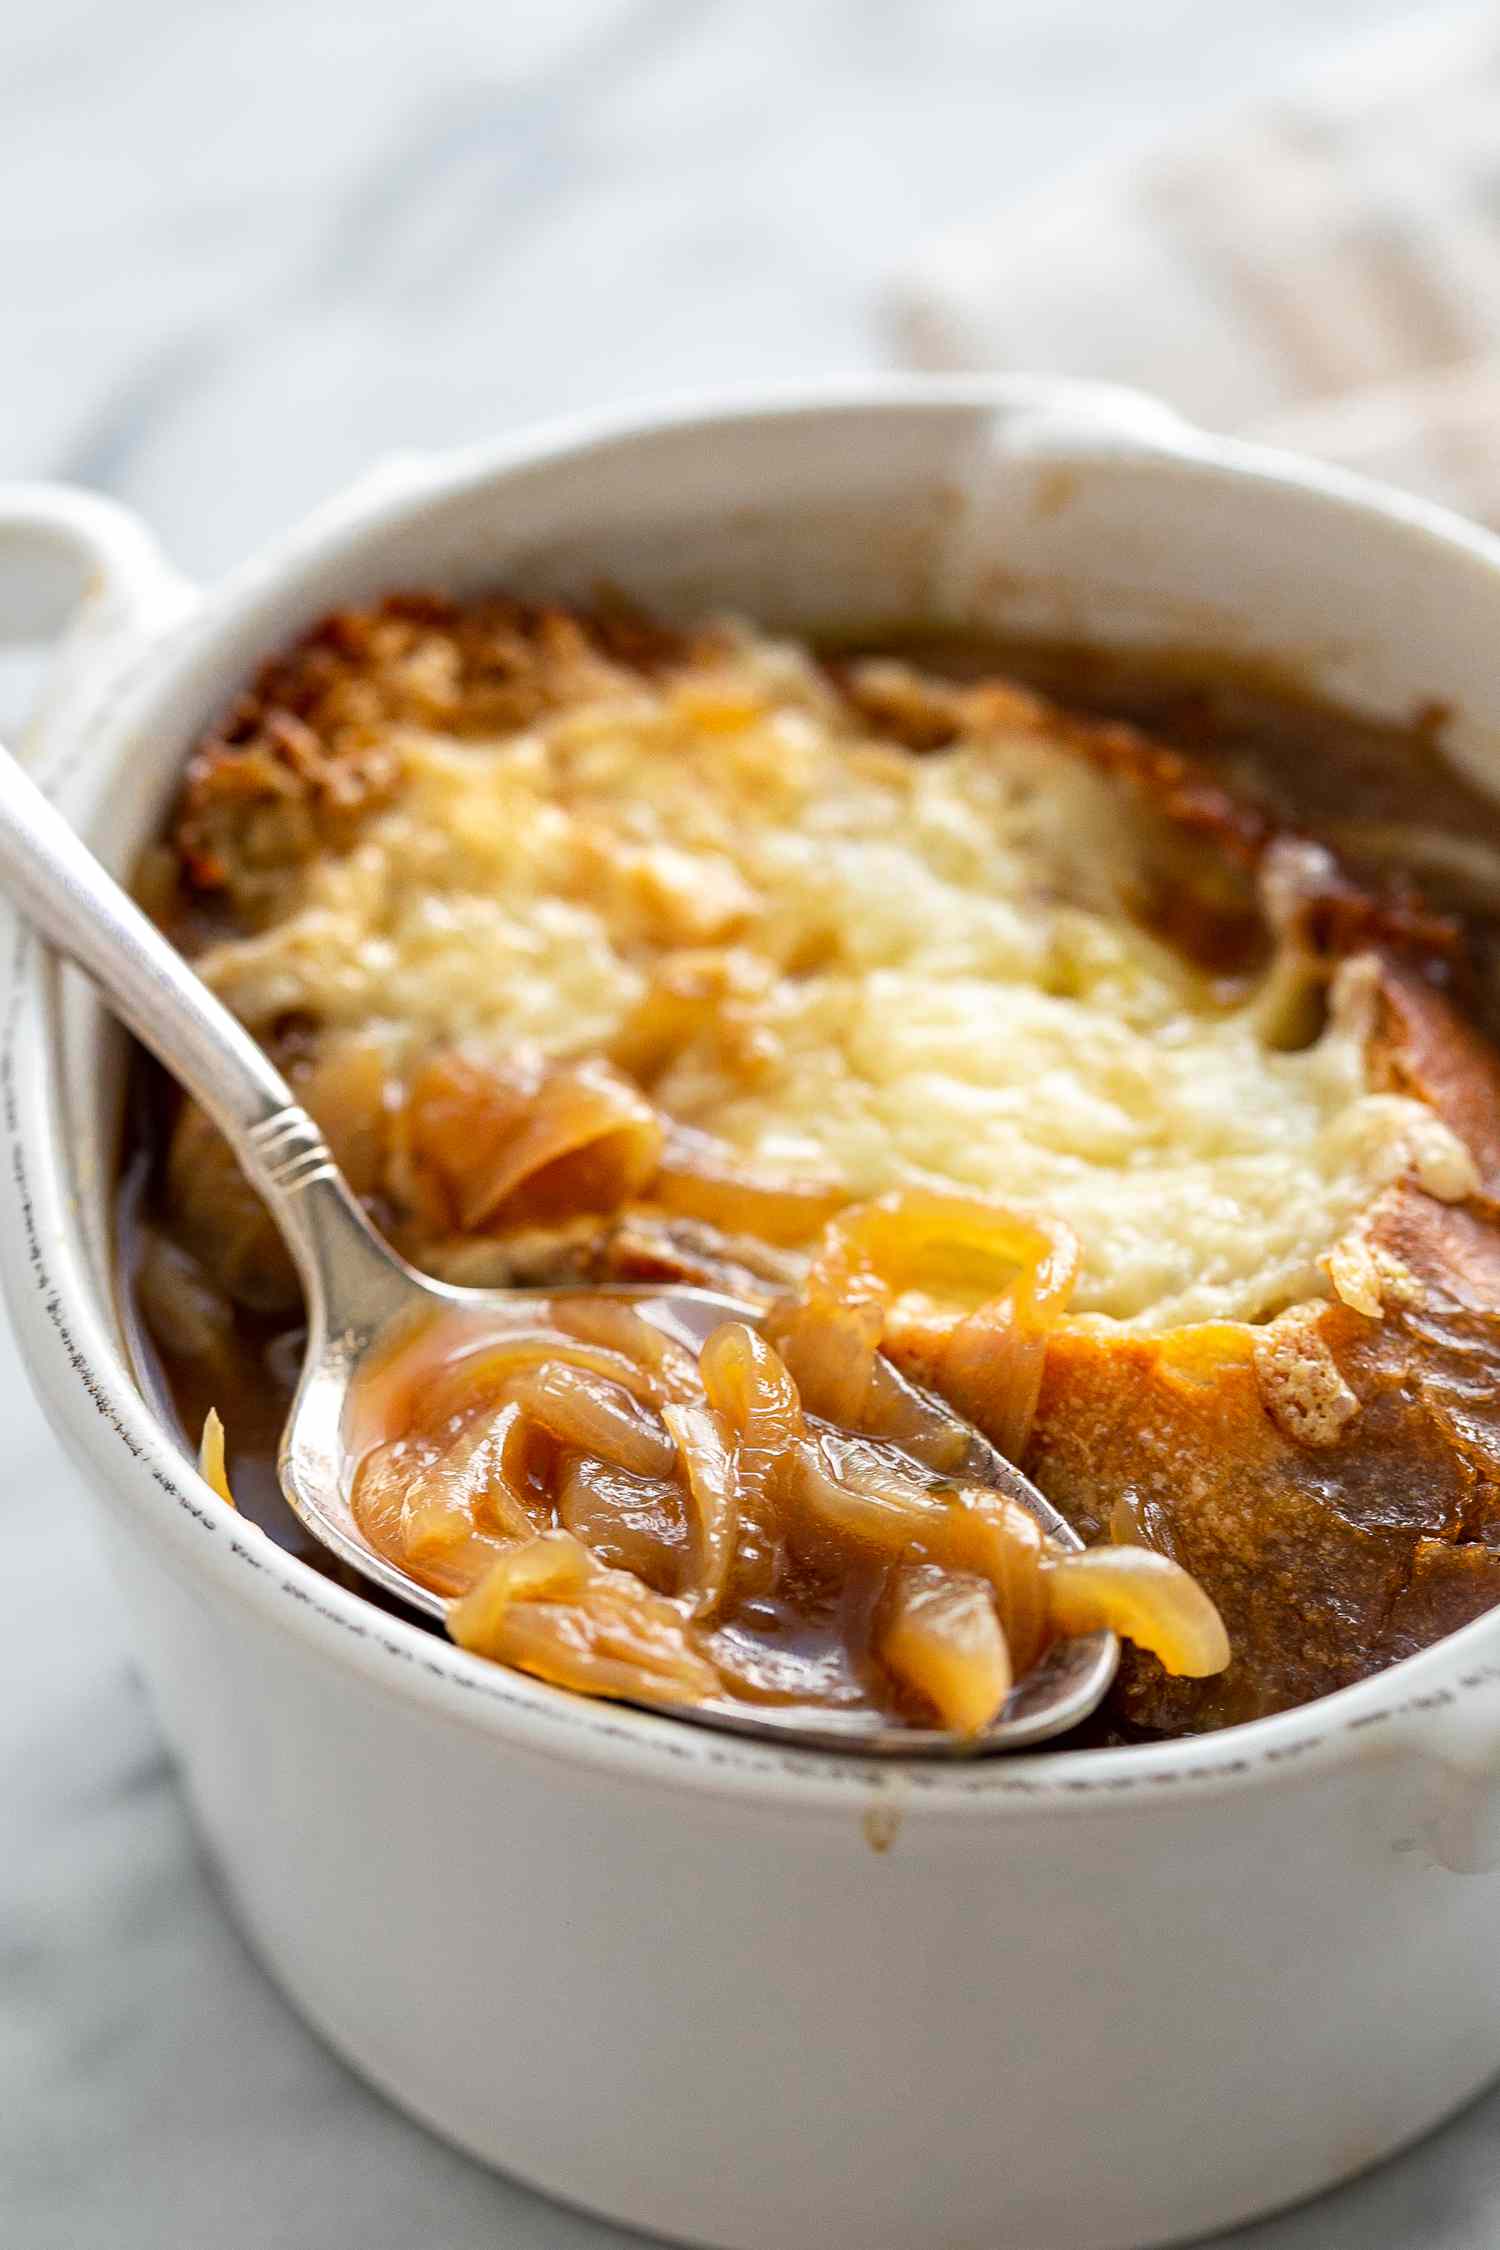 Make Restaurant Quality Savory French Onion Soup in Your Own Kitchen